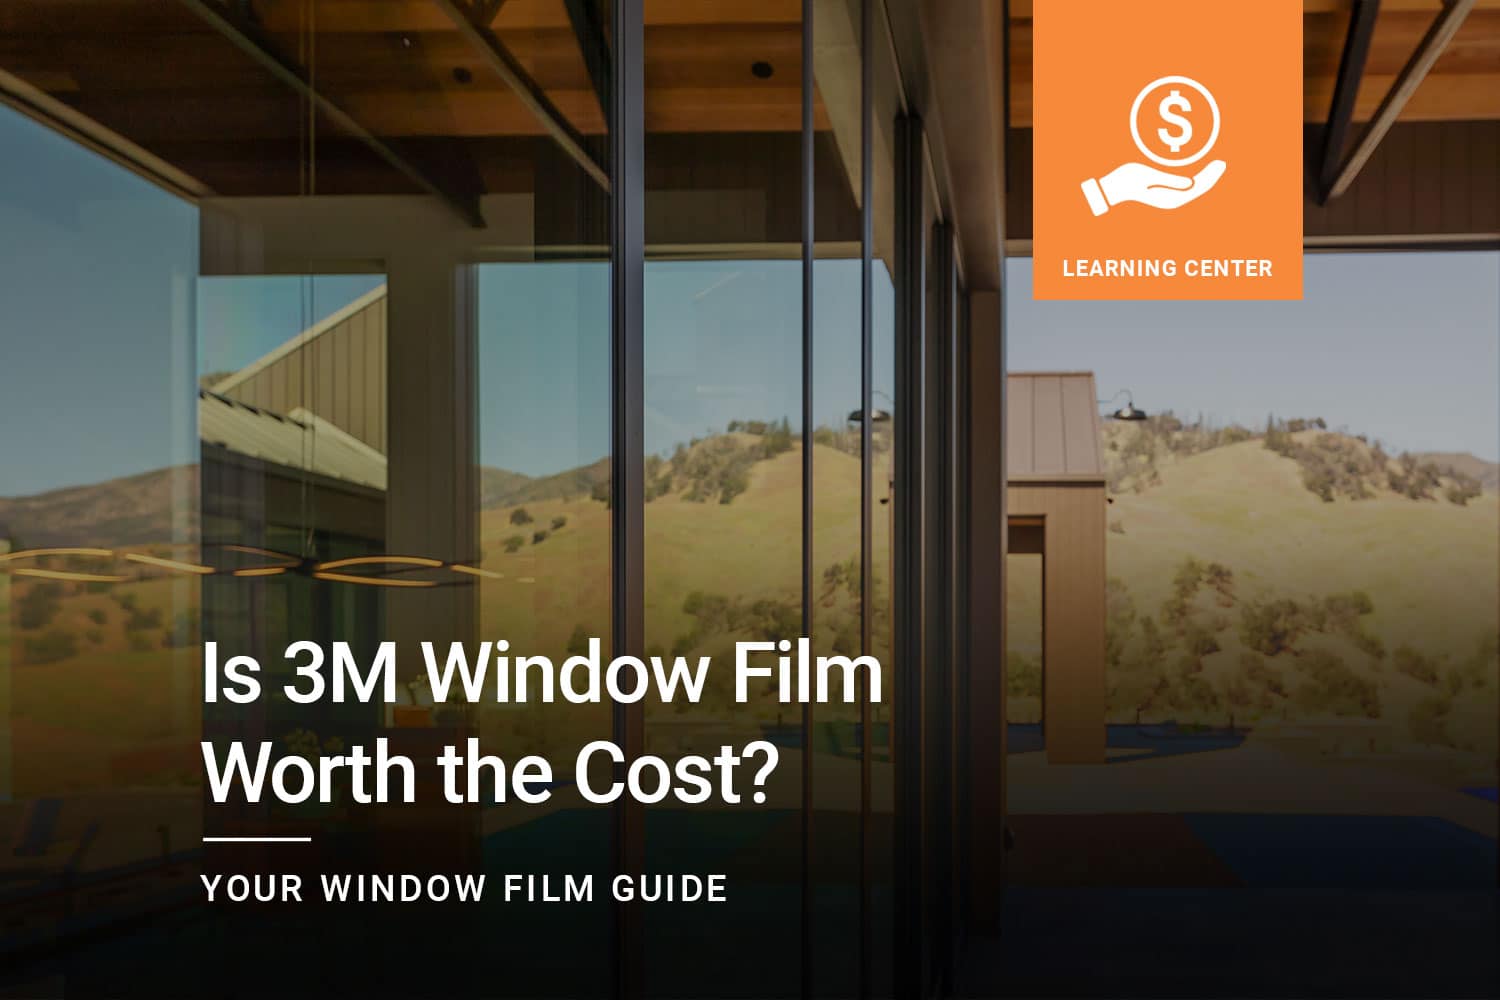 Is Window Film worth the cost? For residential and commercial customers, it's not only worth it but necessary.